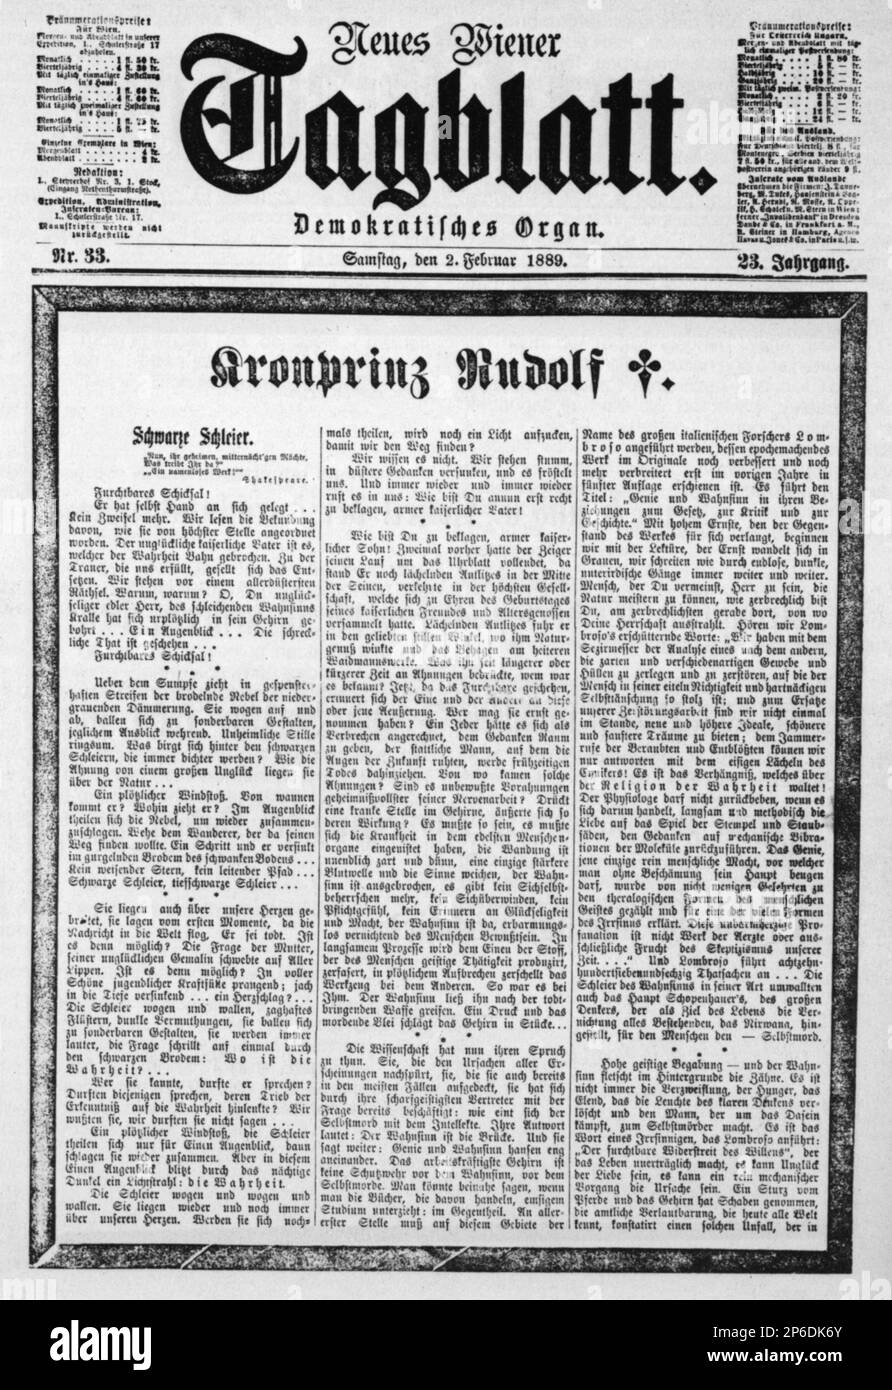 1889, 2 february , Wien , AUSTRIA : The newspaper NEUES WIENER TAGBLATT with the of austrian kronprinz RUDOLF von ABSBURG ( 1850 - committed suicide at Mayerling 1889 ) new of dead  , lover of Mary Von Vetsera , son of Kaiser Franz Josef ( 1830 - 1916 ) , Emperor of Austria , King of Hungary and Bohemia and Empress Elisabeth von Bayer ( SISSI , 1937 - 1898 ).   - FRANCESCO GIUSEPPE - JOSEPH - ABSBURG - ASBURG - ASBURGO - NOBILITY - NOBILI - Nobiltà - REALI - HABSBURG - HASBURG - ROYALTY - quotidiano - giornale - principe ereditario - RODOLFO  ----  Archivio GBB Stock Photo